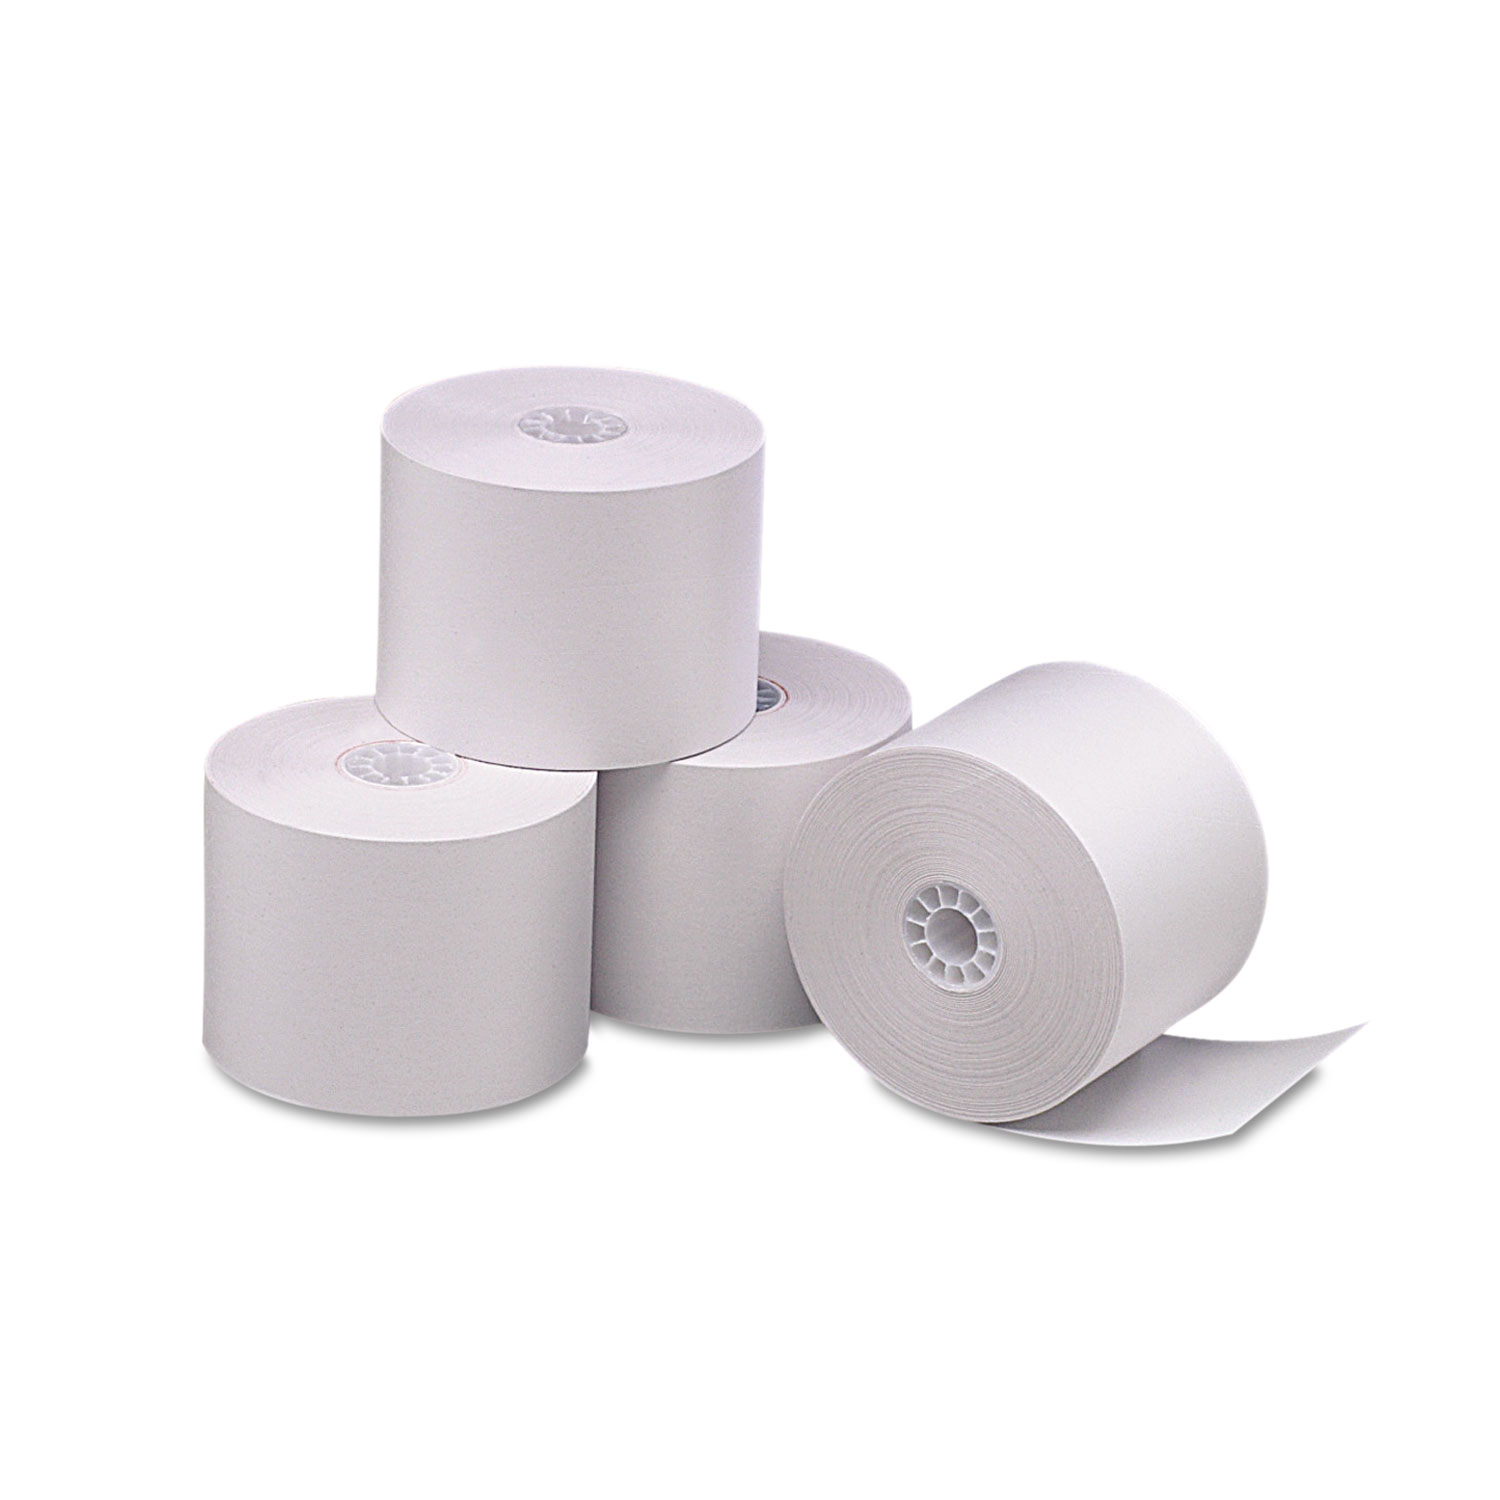  Iconex 05212 Direct Thermal Printing Thermal Paper Rolls, 2.25 x 165 ft, White, 6/Pack (ICX90781276) 